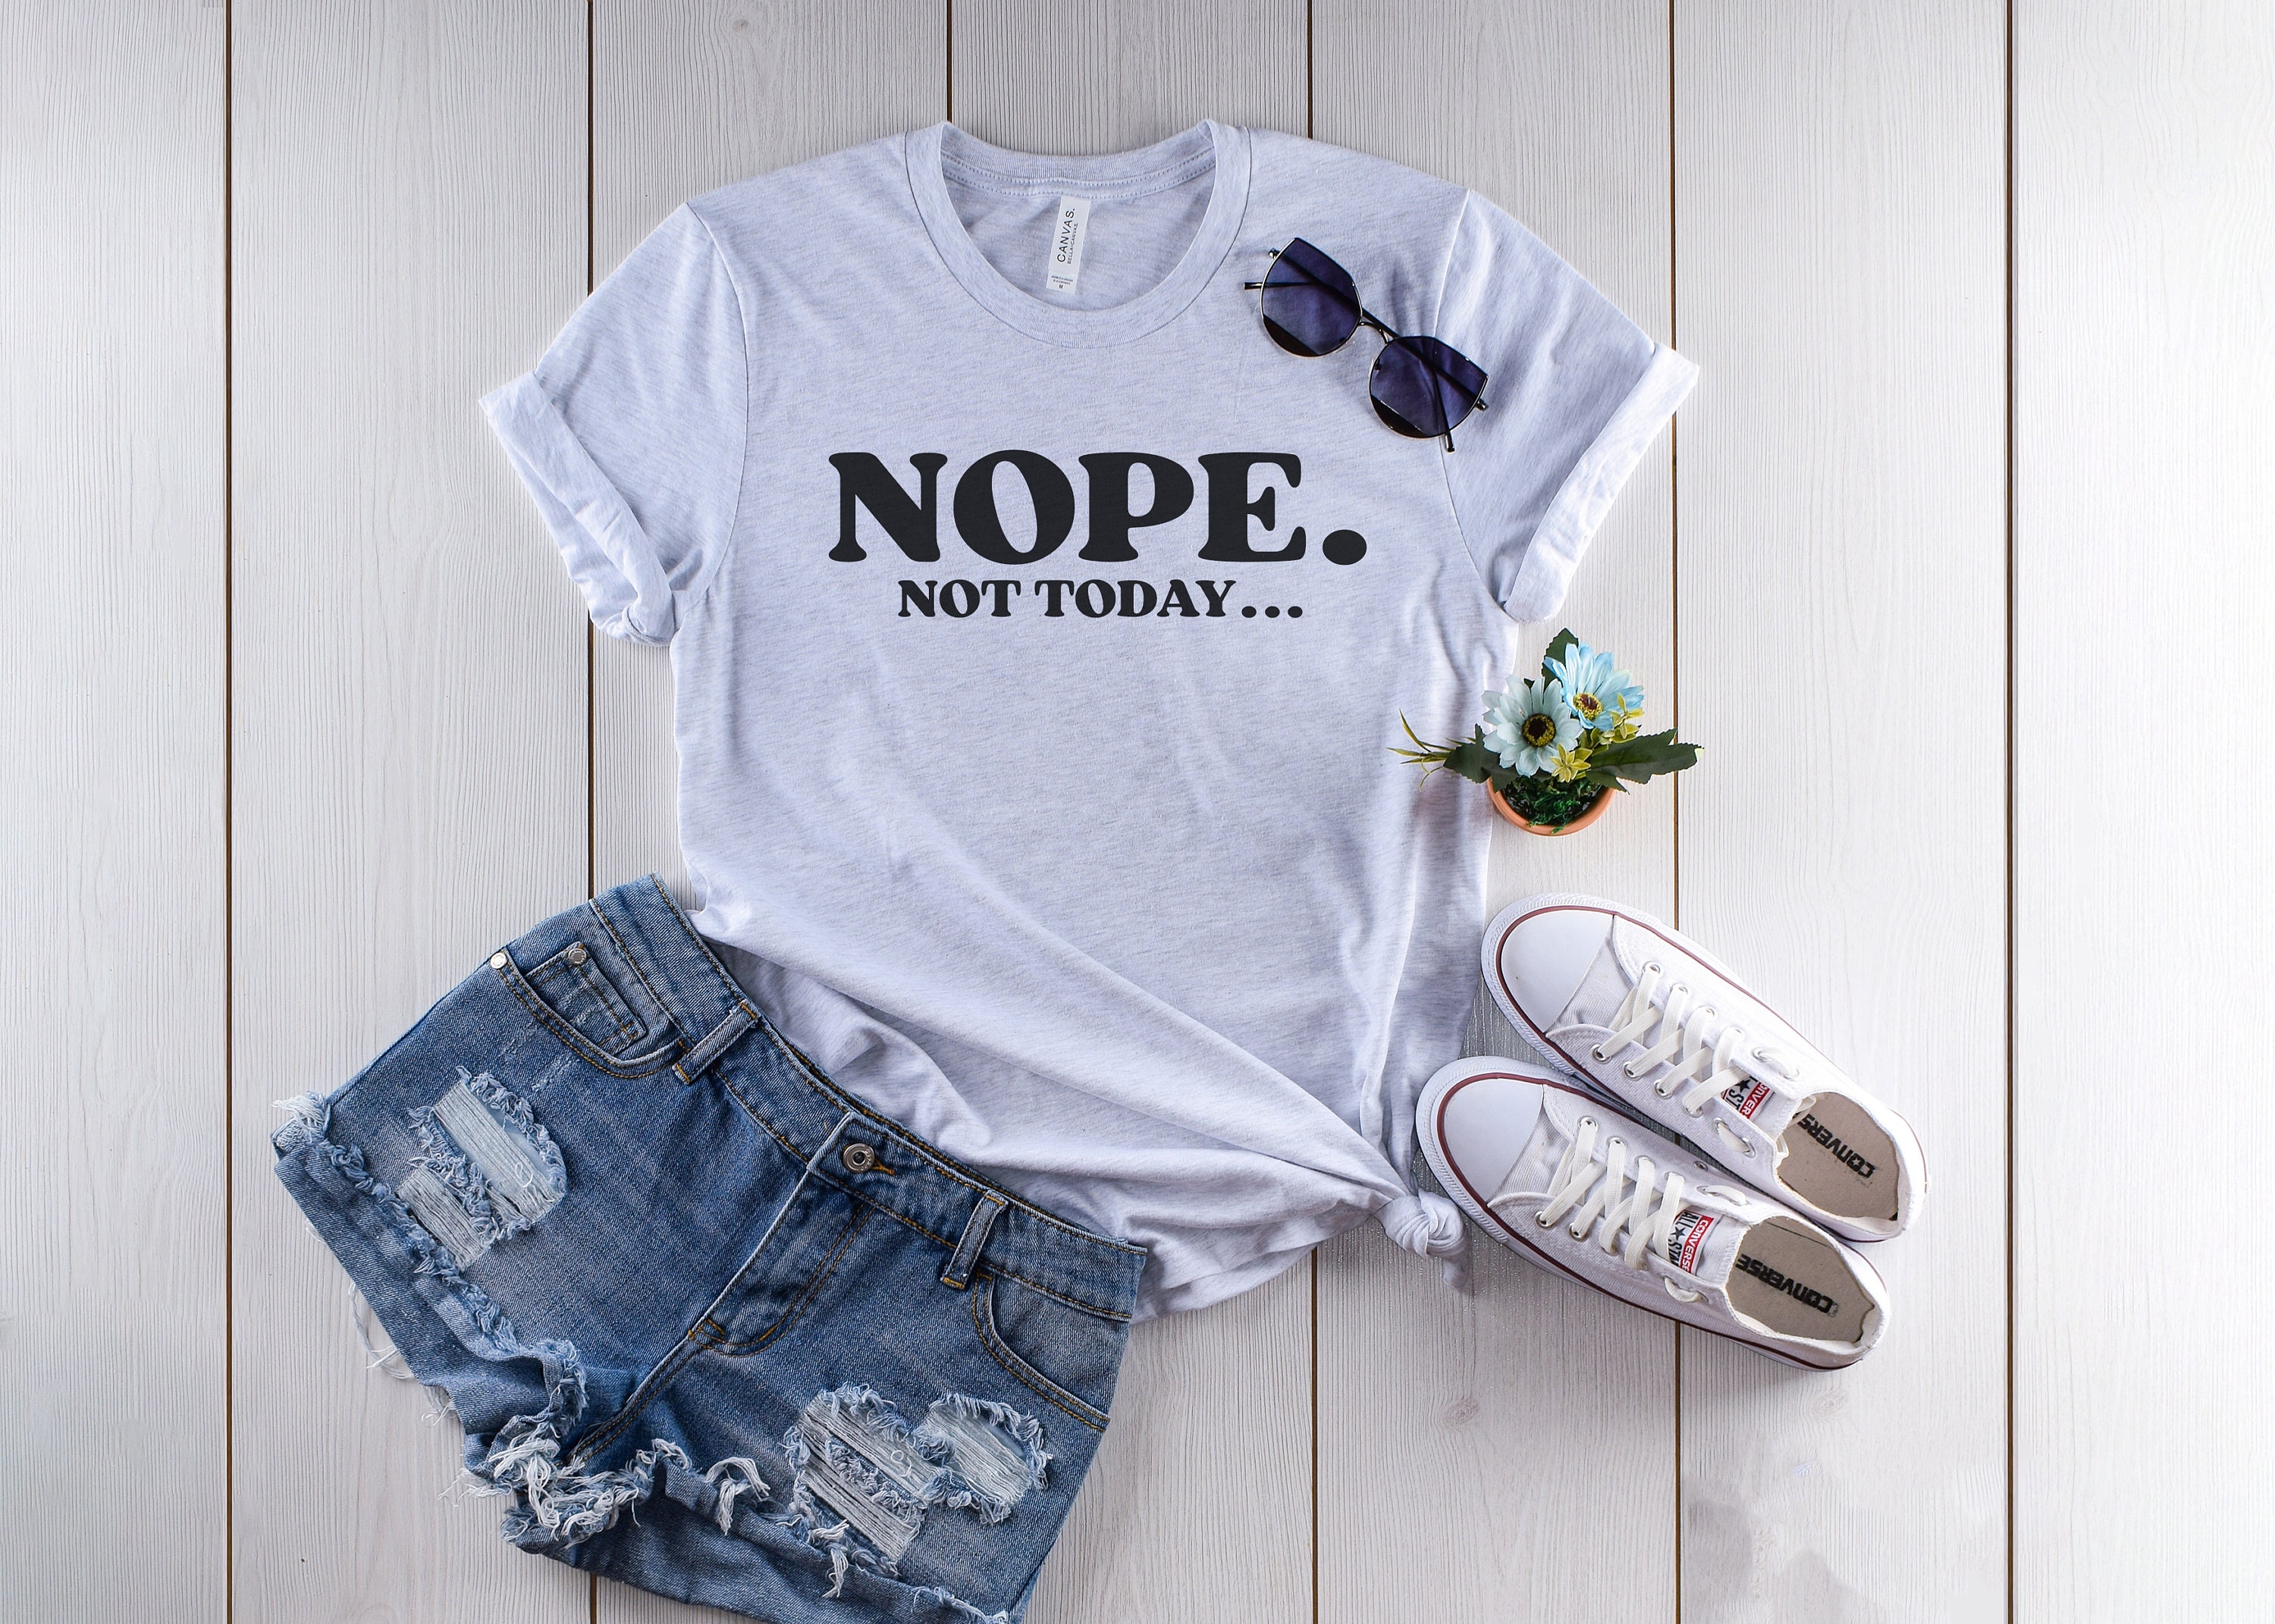 Today Nope Pas Today Tom Et Jerry T-Shirts pour Hommes K312 